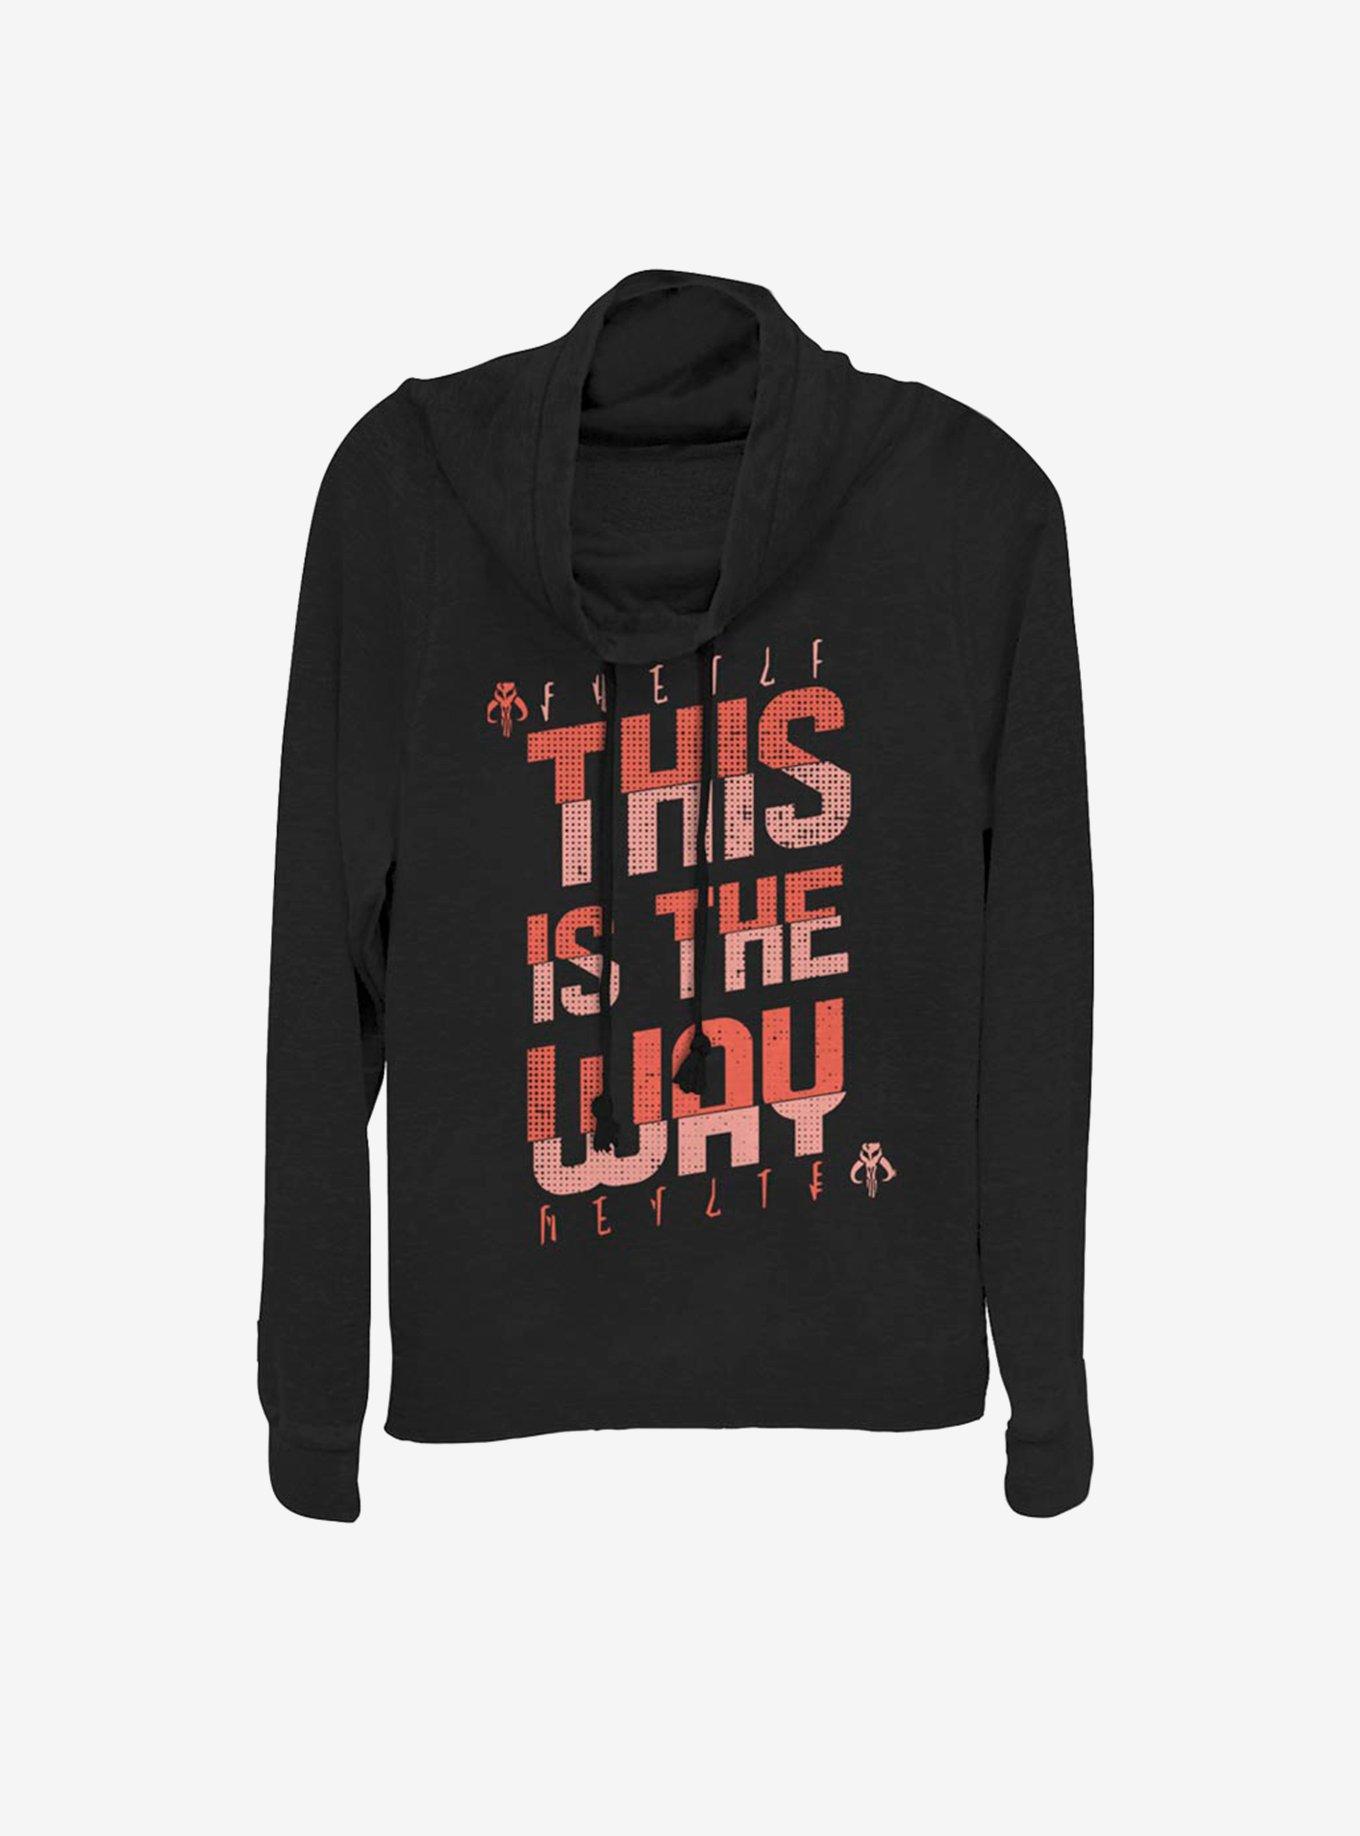 Star Wars The Mandalorian This Is The Way Red Script Cowlneck Long-Sleeve Womens Top, BLACK, hi-res